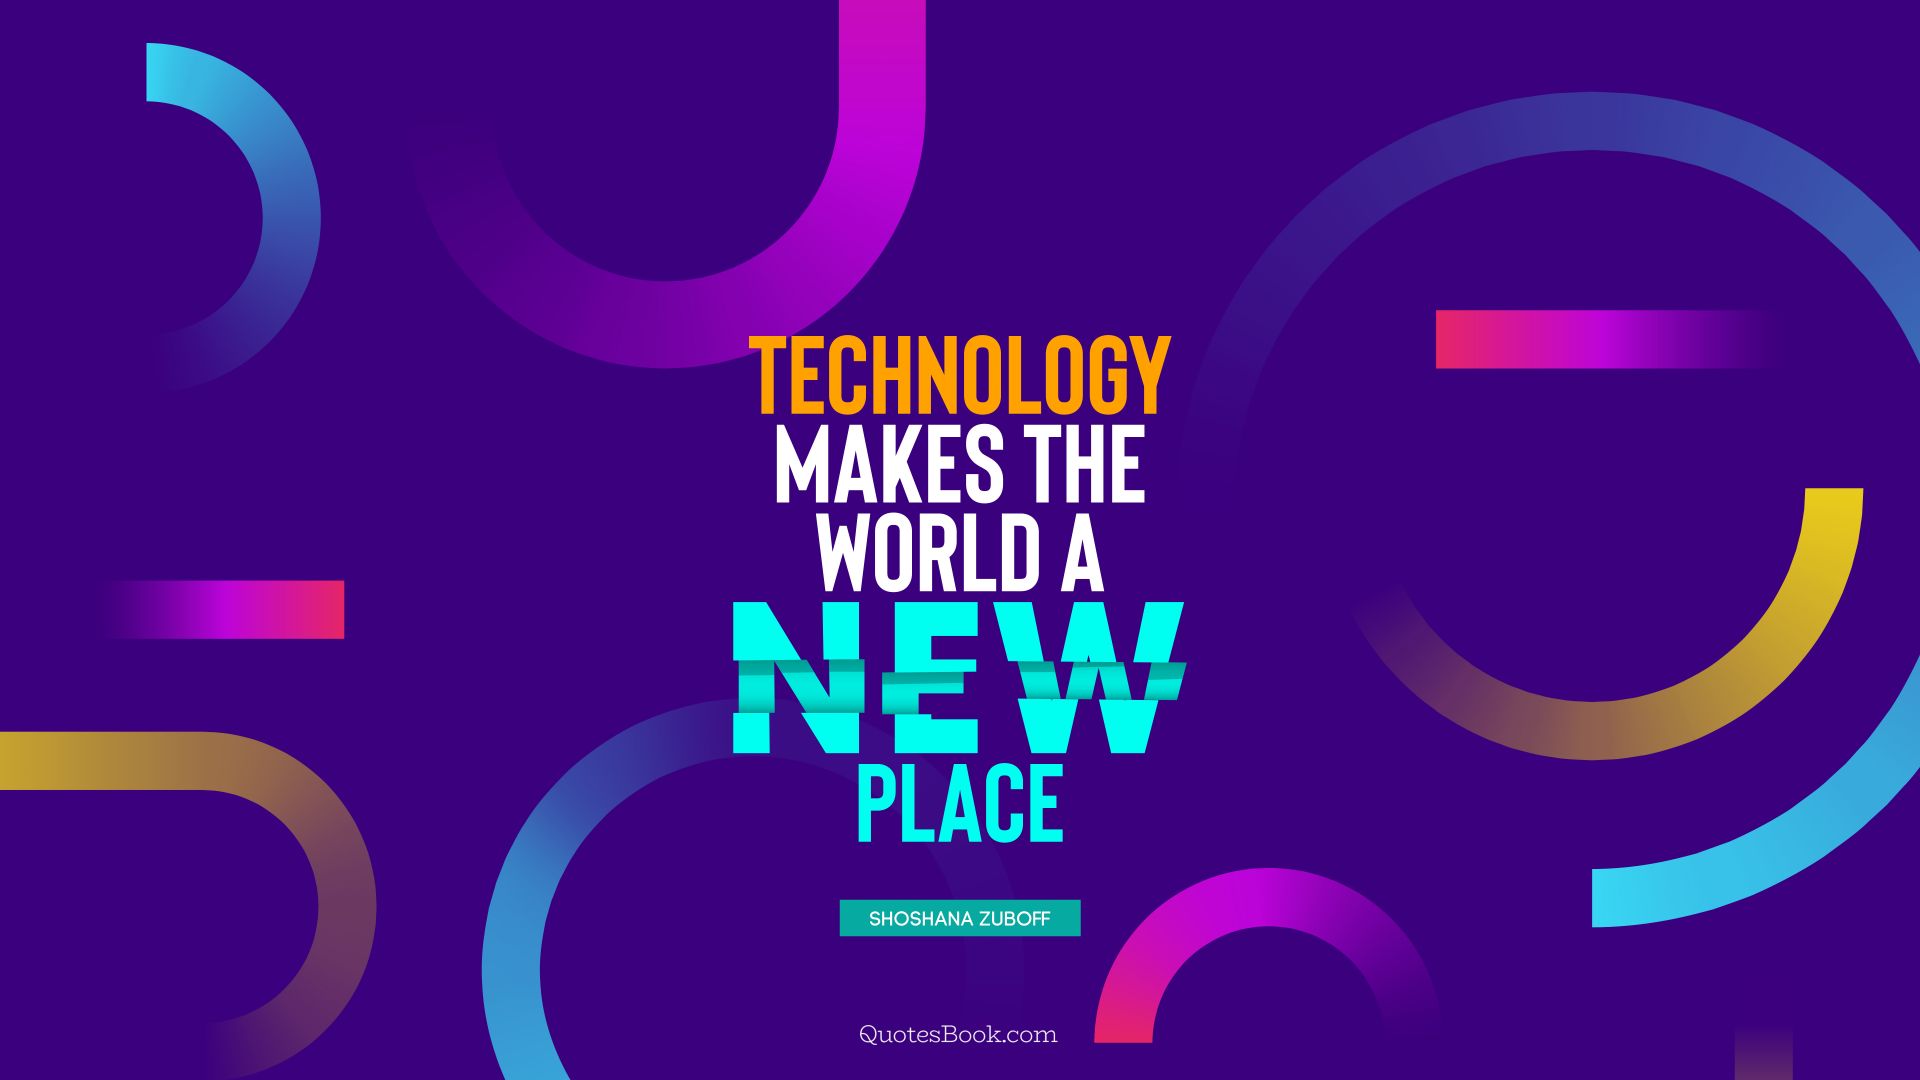 Technology makes the world a new place. - Quote by Shoshana Zuboff